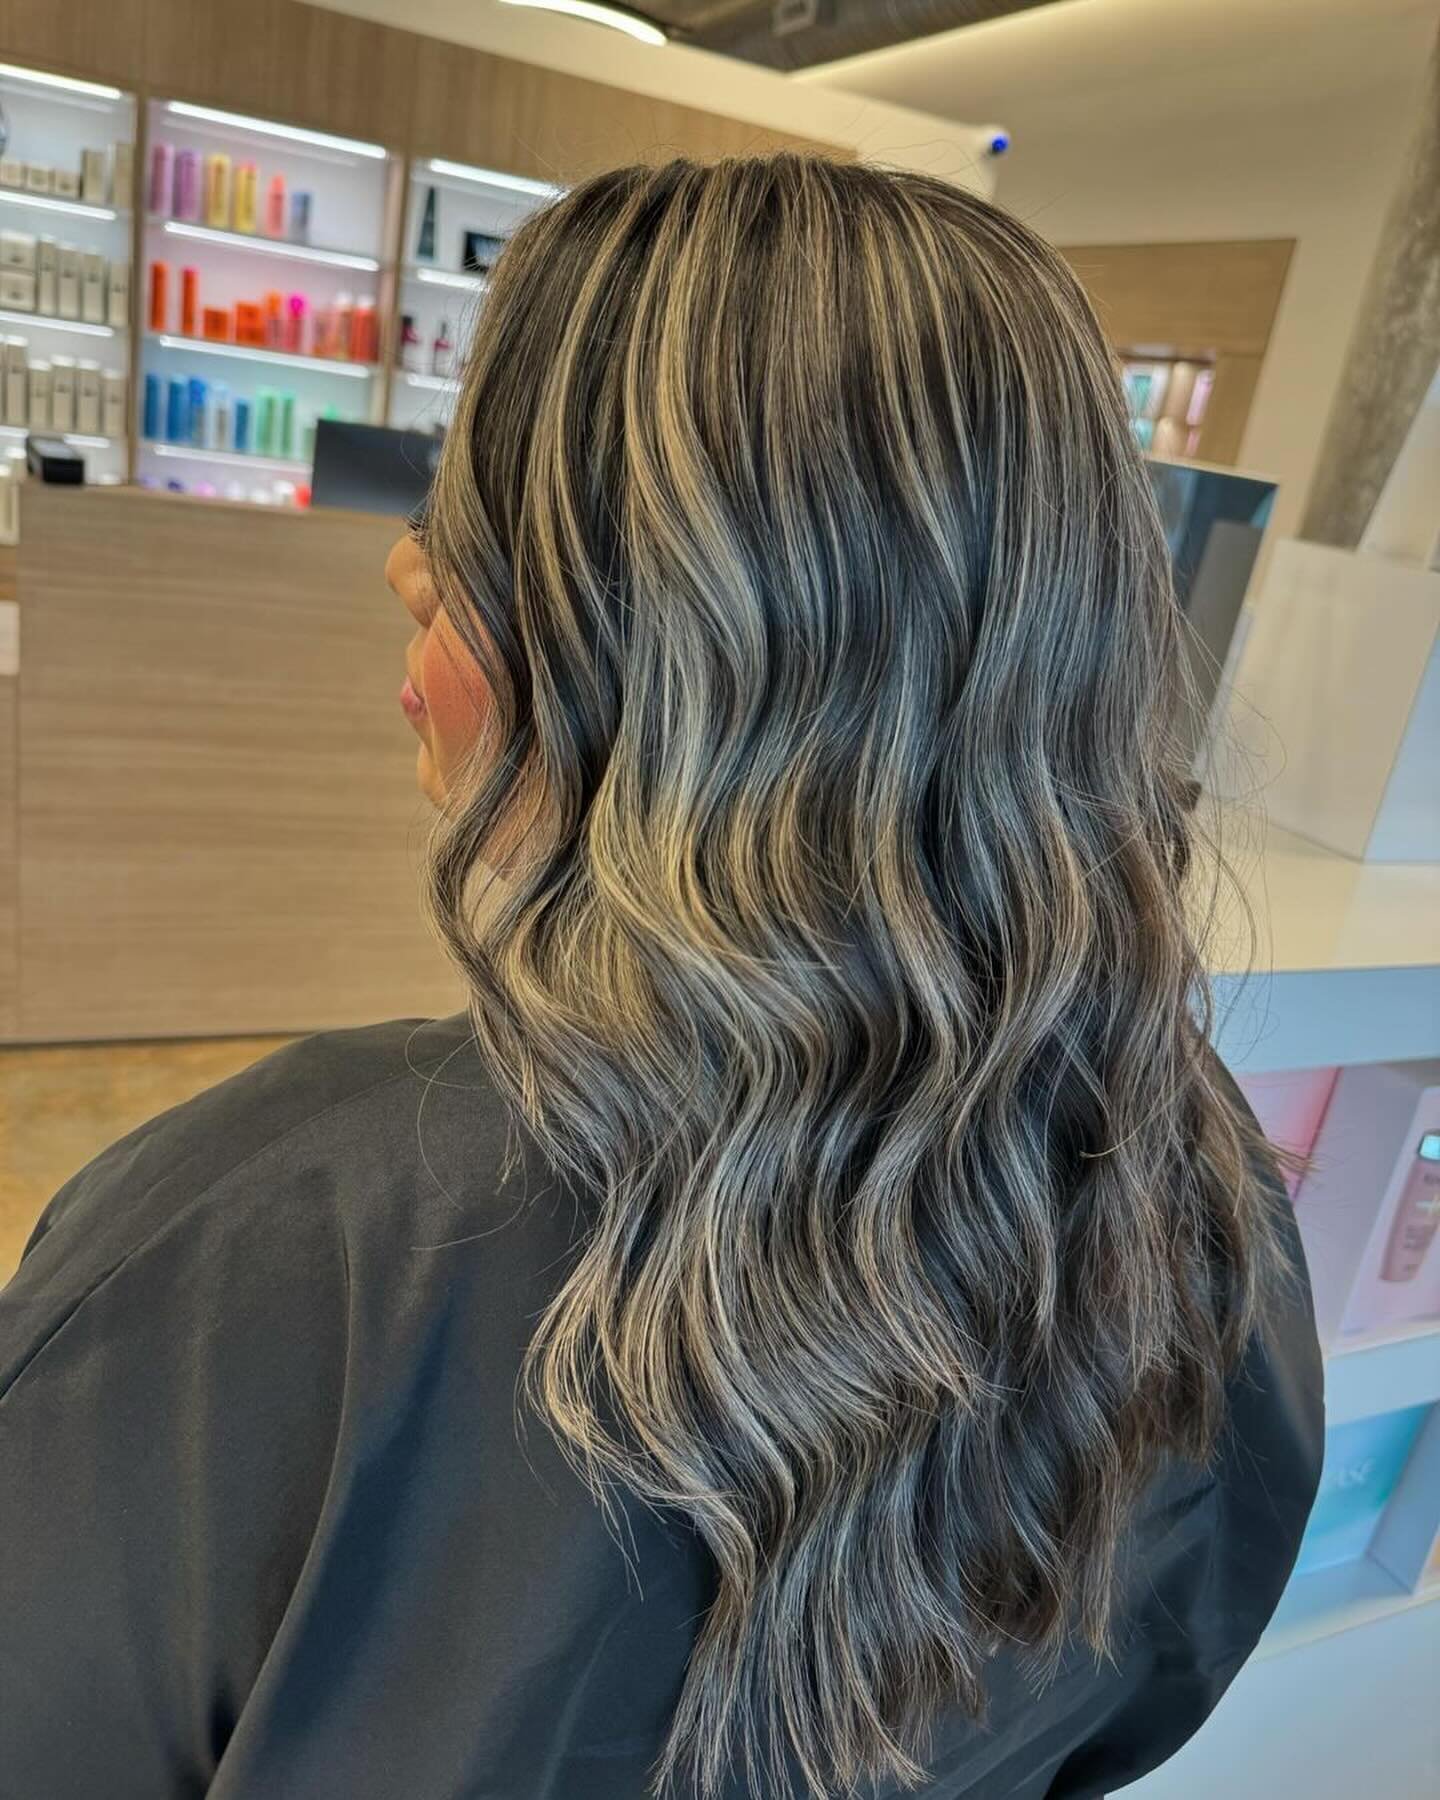 Check out this Spring transformation 😍

Hair by @hairby.rosa 

#beautiquehouston #beautiquewestuniversity #houstonhairsalon 🏷Beautique houston, Beautique, houston, Beautique day spa, day spa, houston day spa, houston hair salon, hair salon